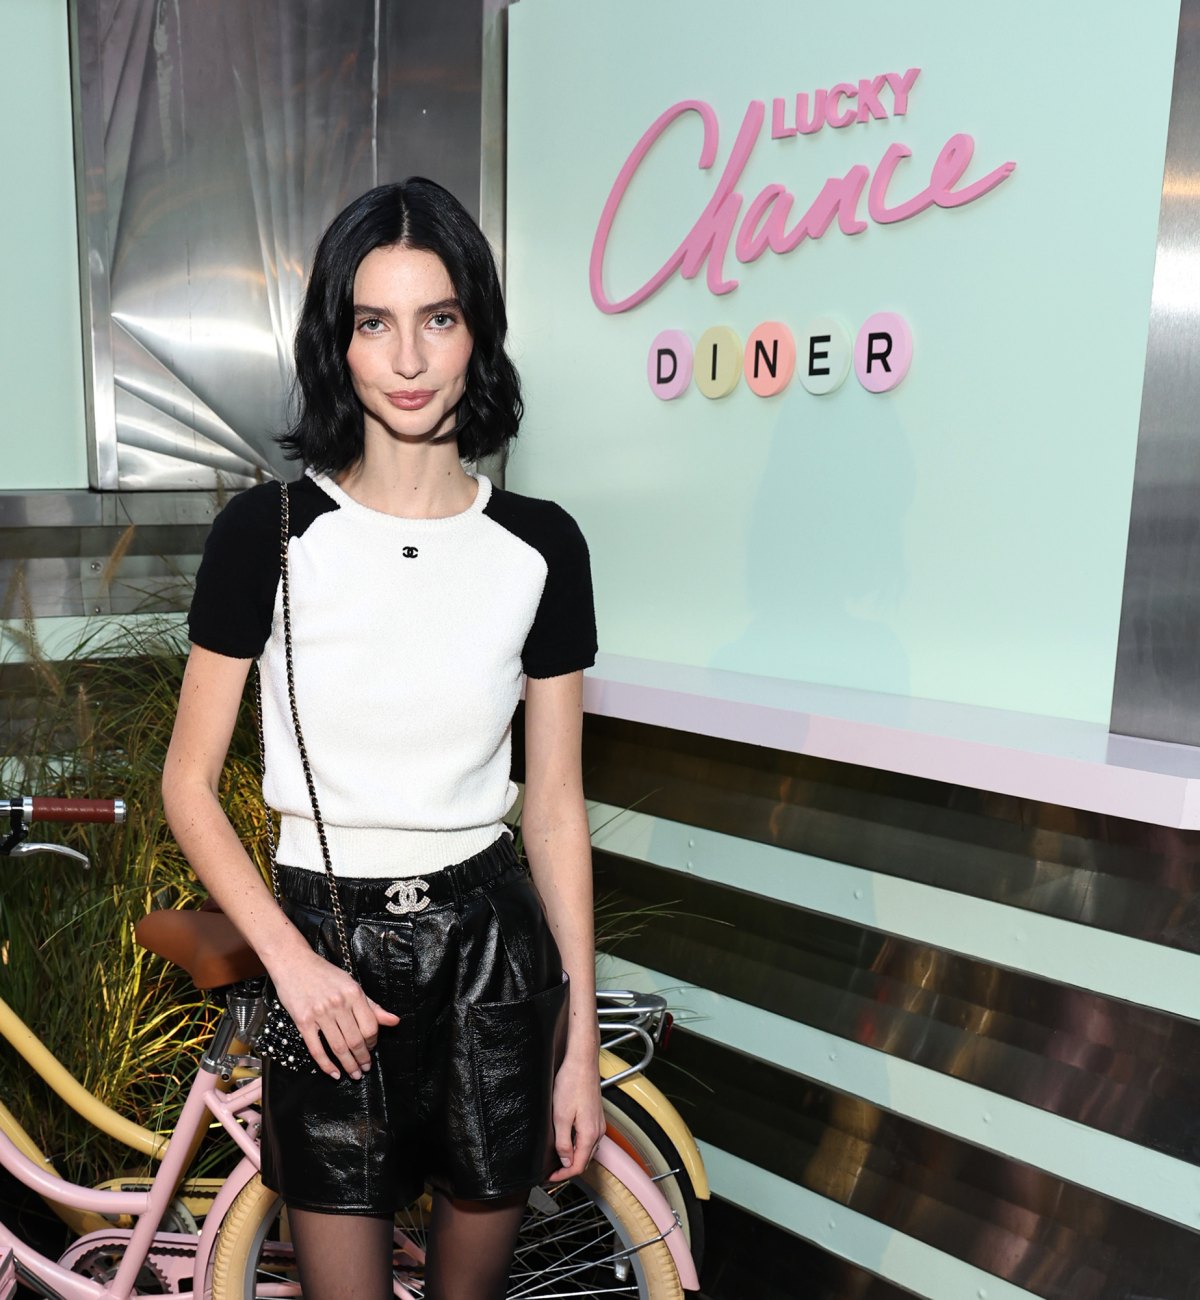 Celebrities Dressed Up and Dined at Chanel's Lucky Chance Diner